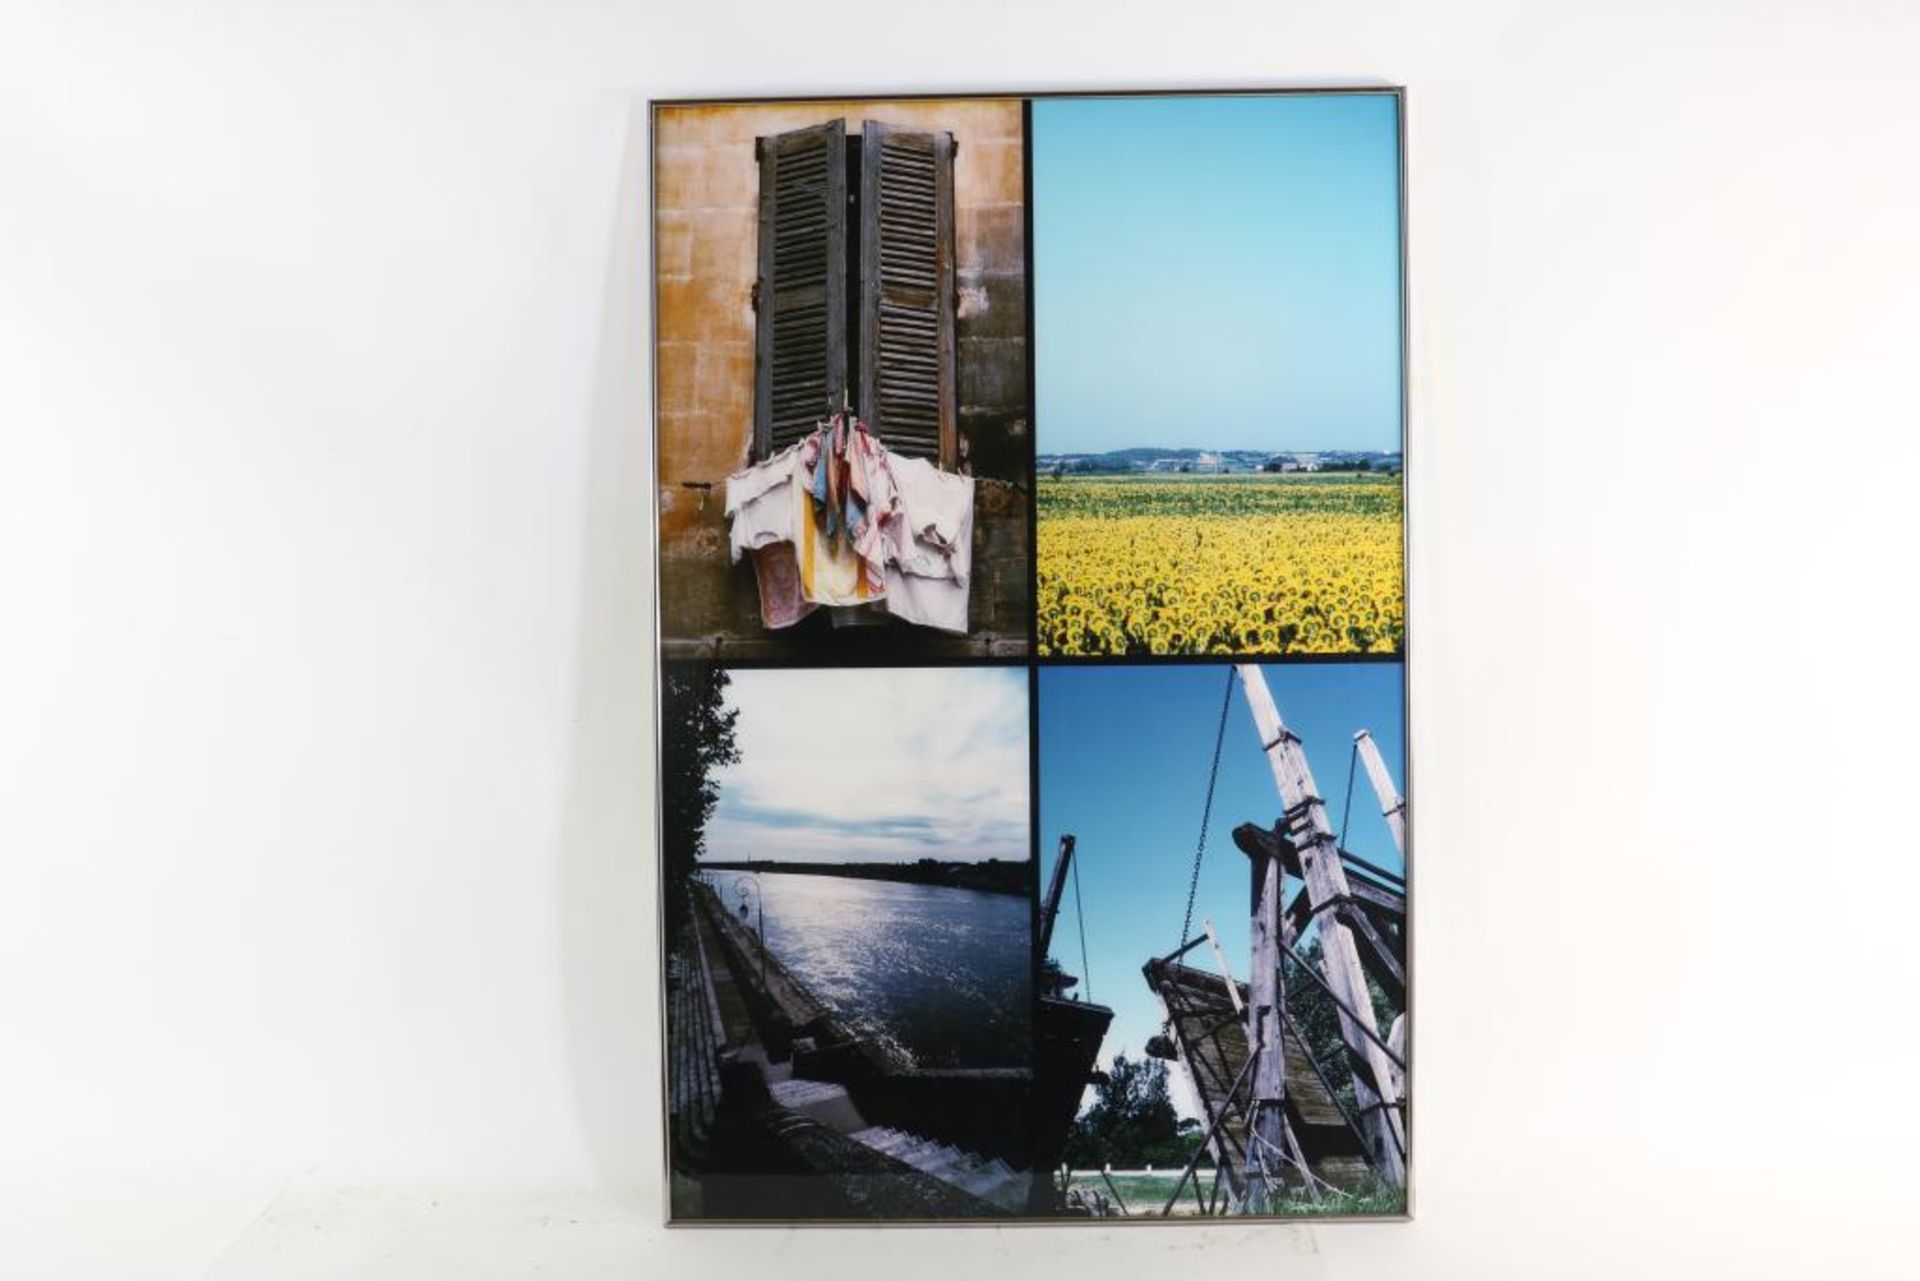 Huf, Paul (1924-2002), Sunflowers, South of France, 3 compilations of photographs 120 x 80 cm. - Bild 3 aus 4